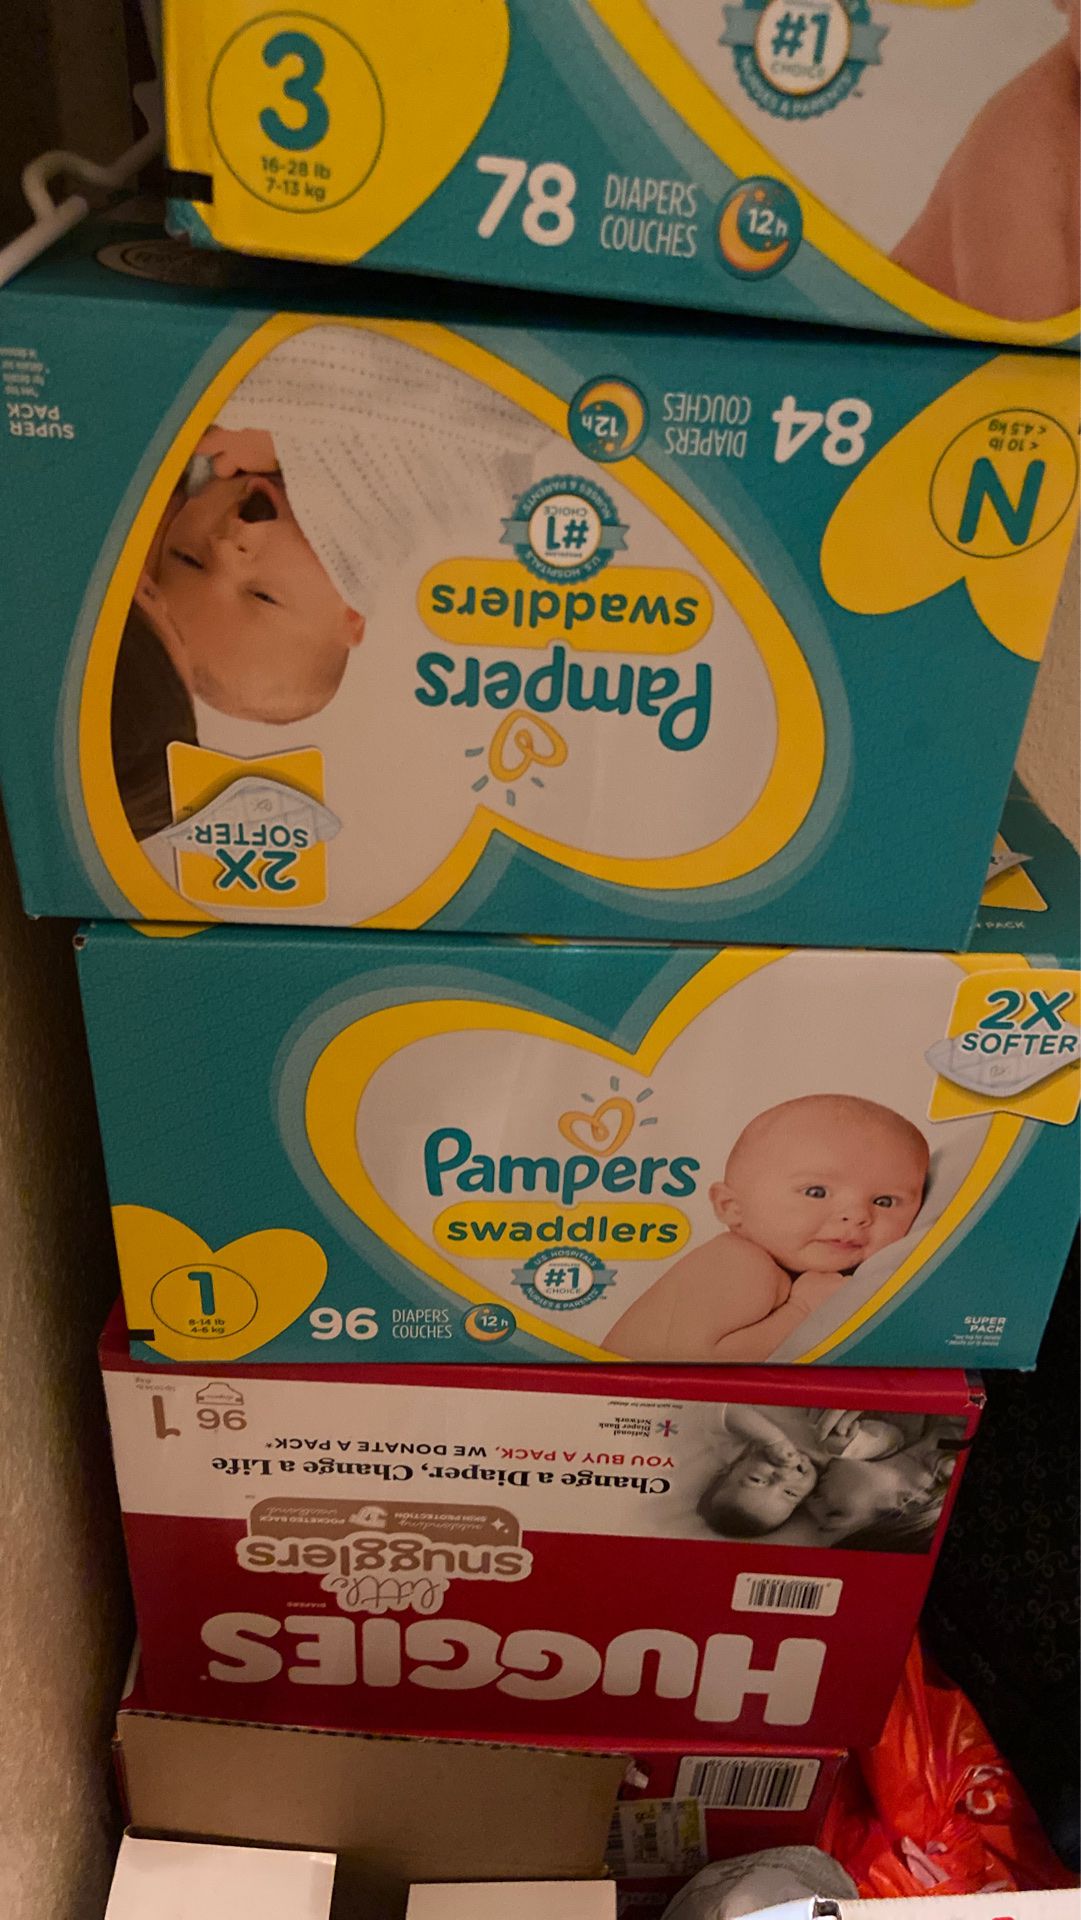 Pampers and Huggies